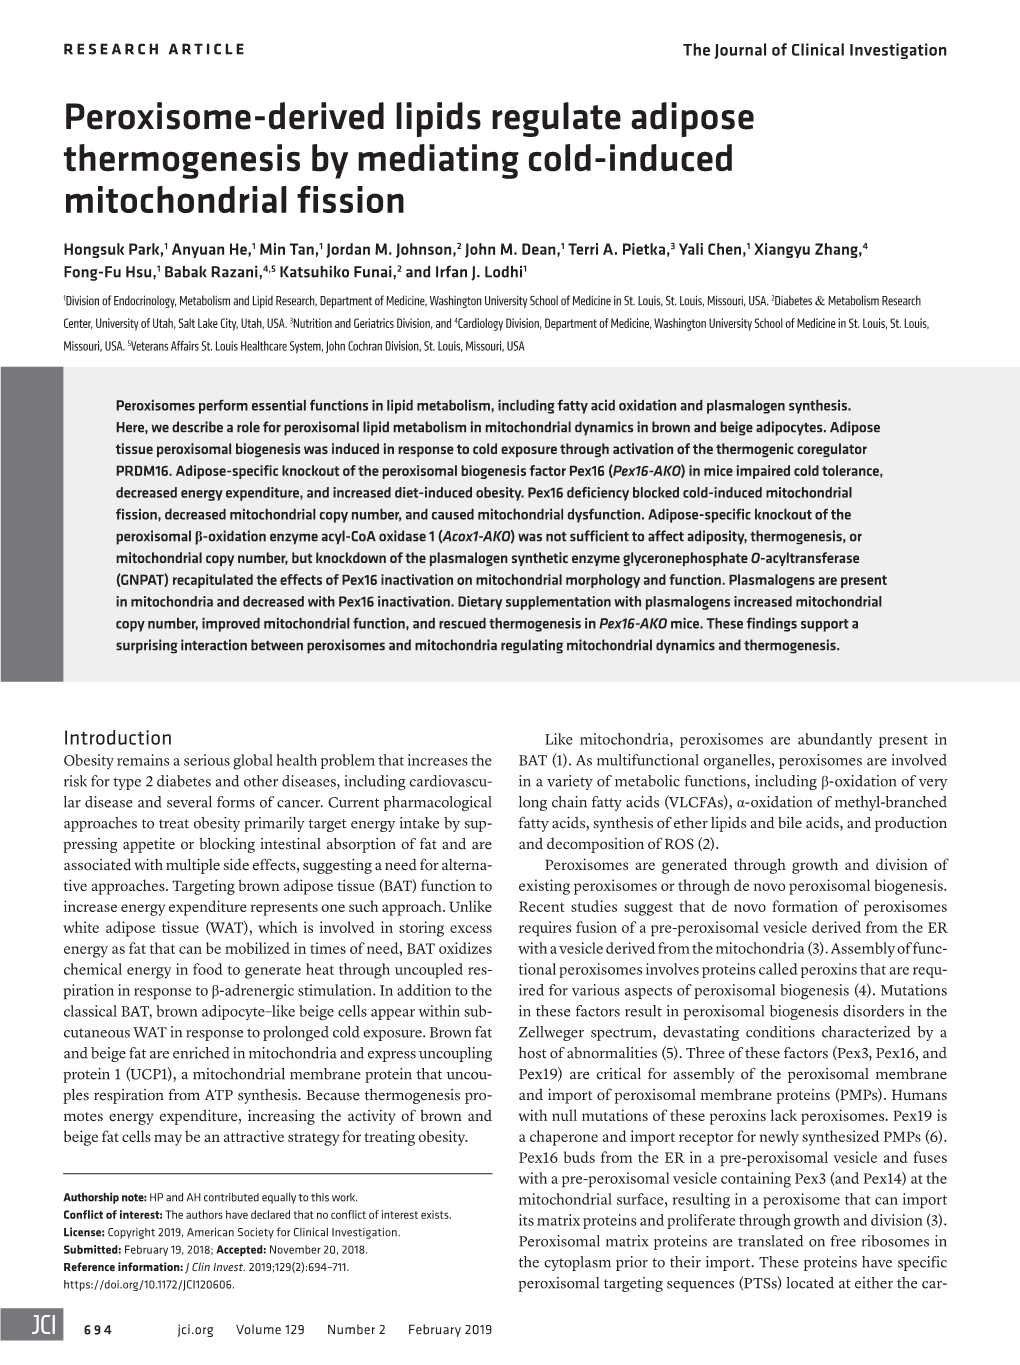 Peroxisome-Derived Lipids Regulate Adipose Thermogenesis by Mediating Cold-Induced Mitochondrial Fission